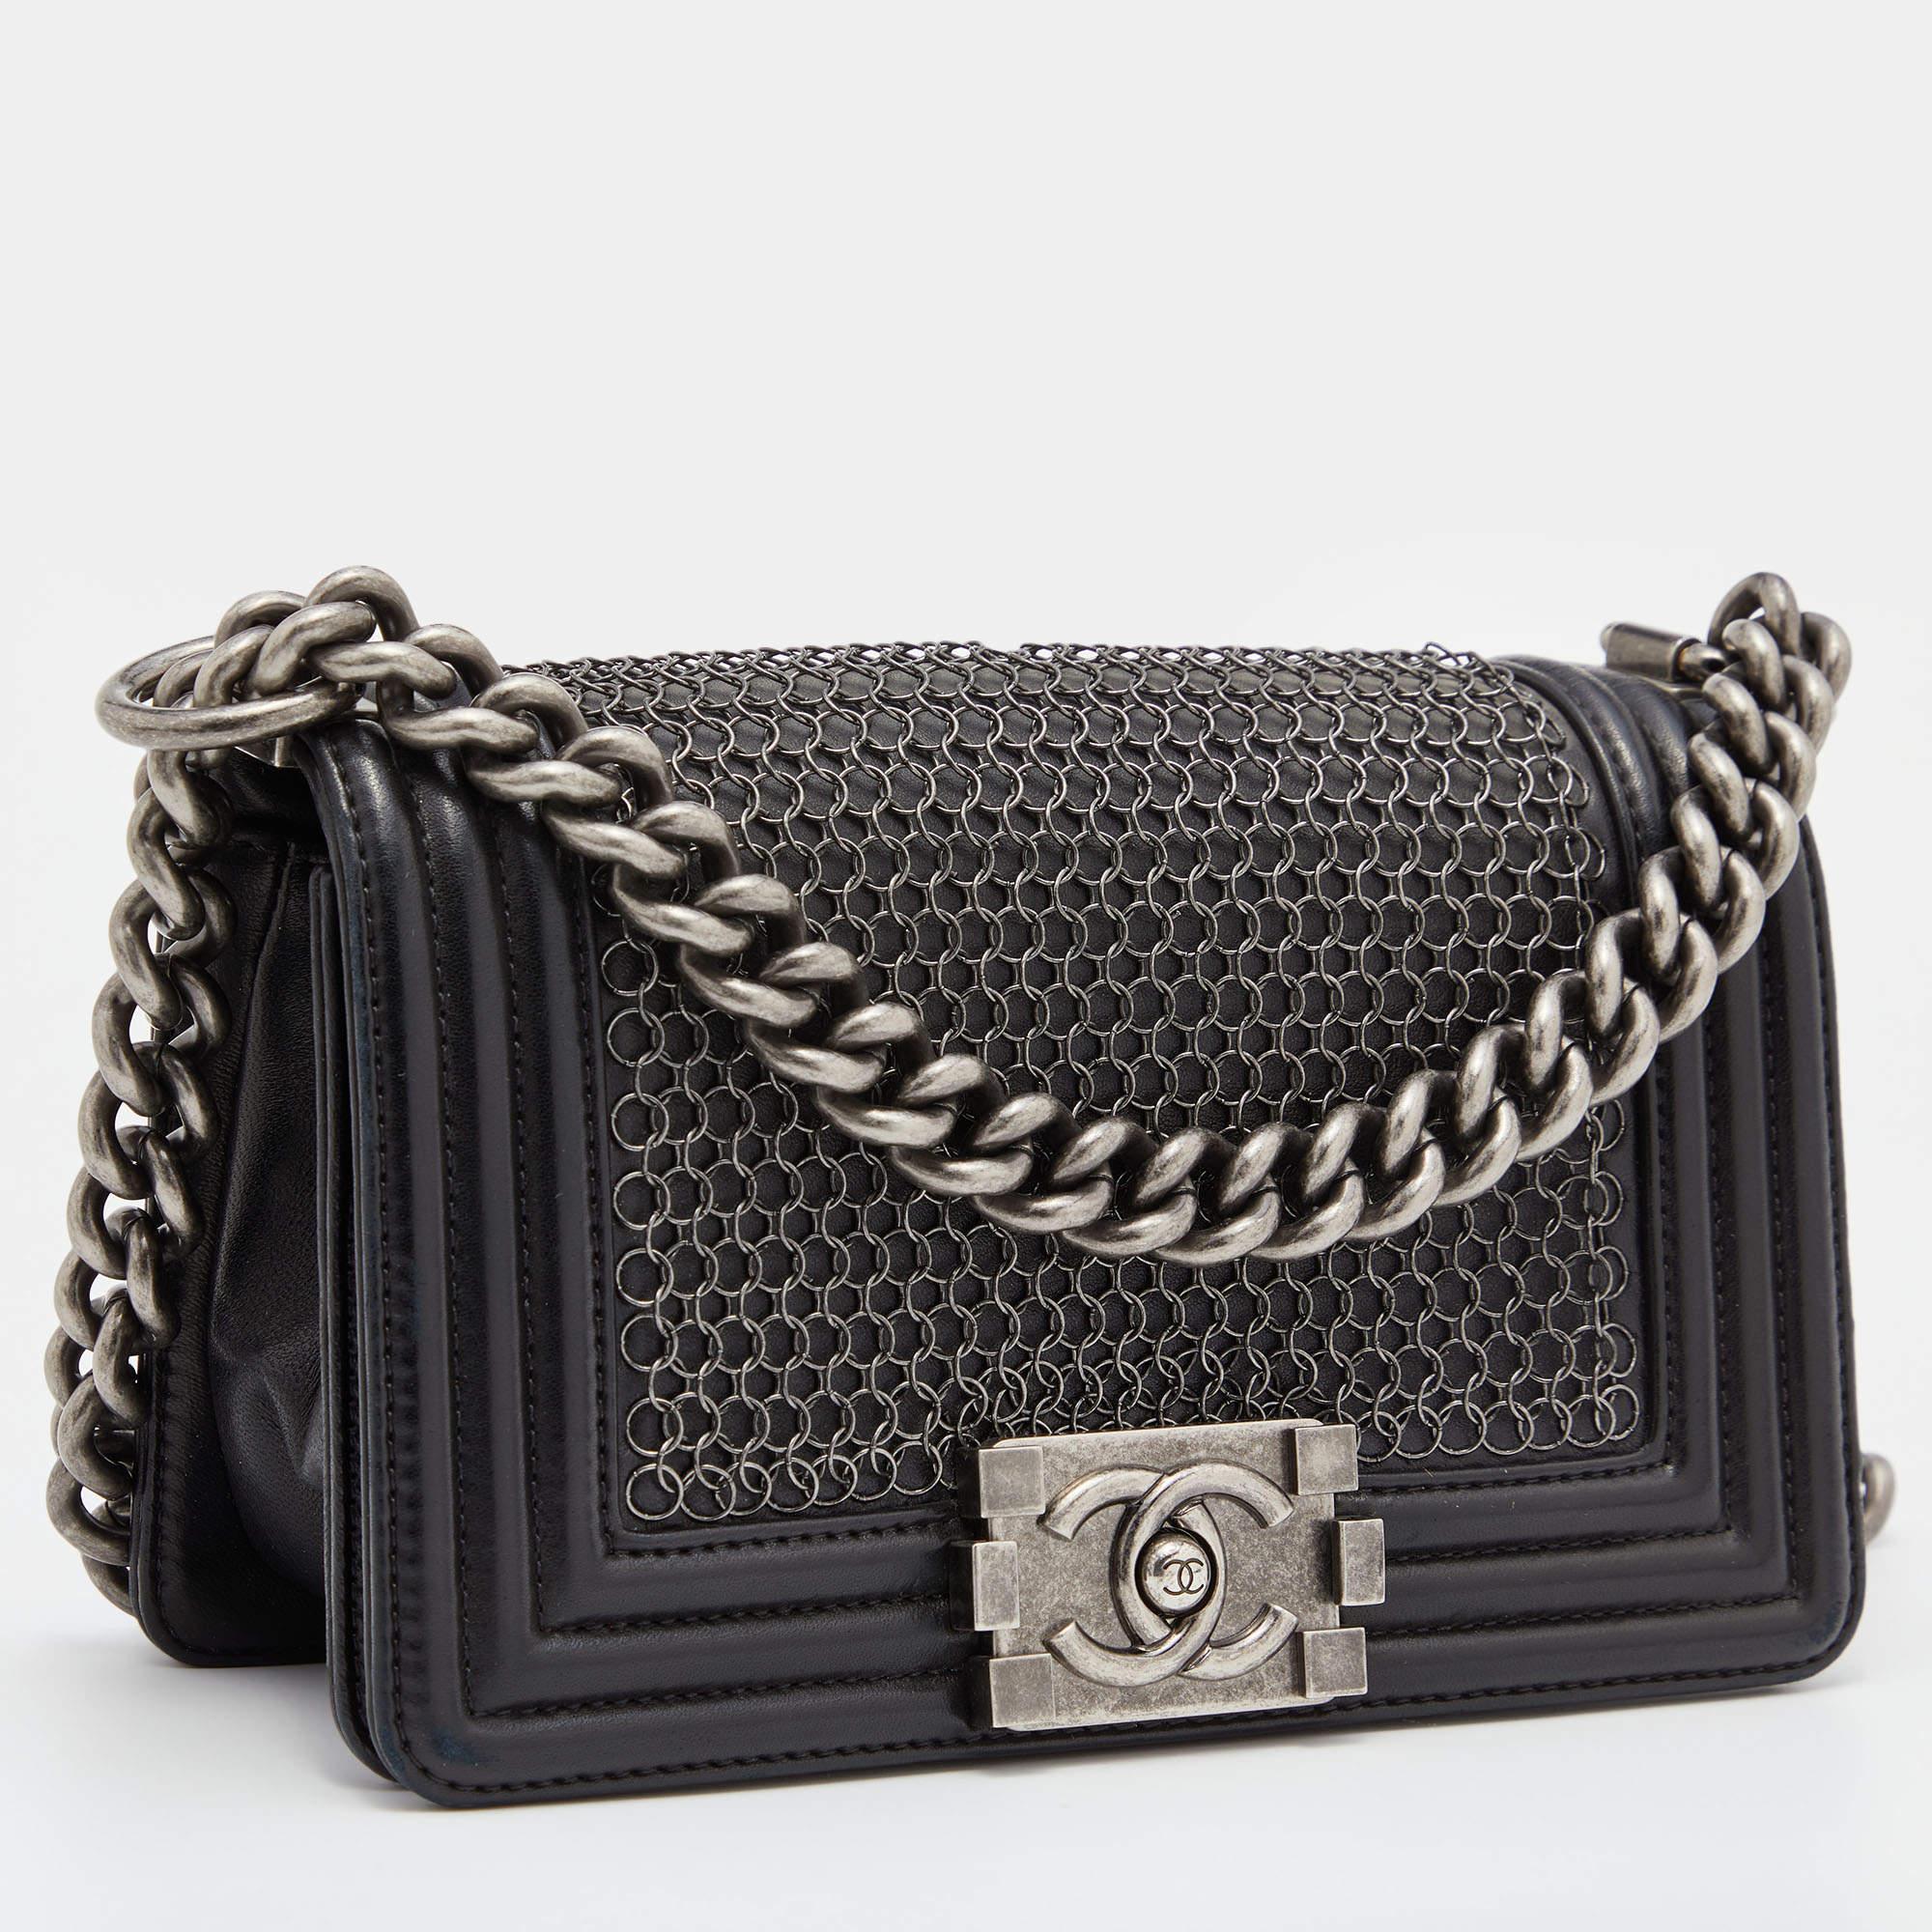 Women's Chanel Black Leather Small Chainmail Boy Flap Bag